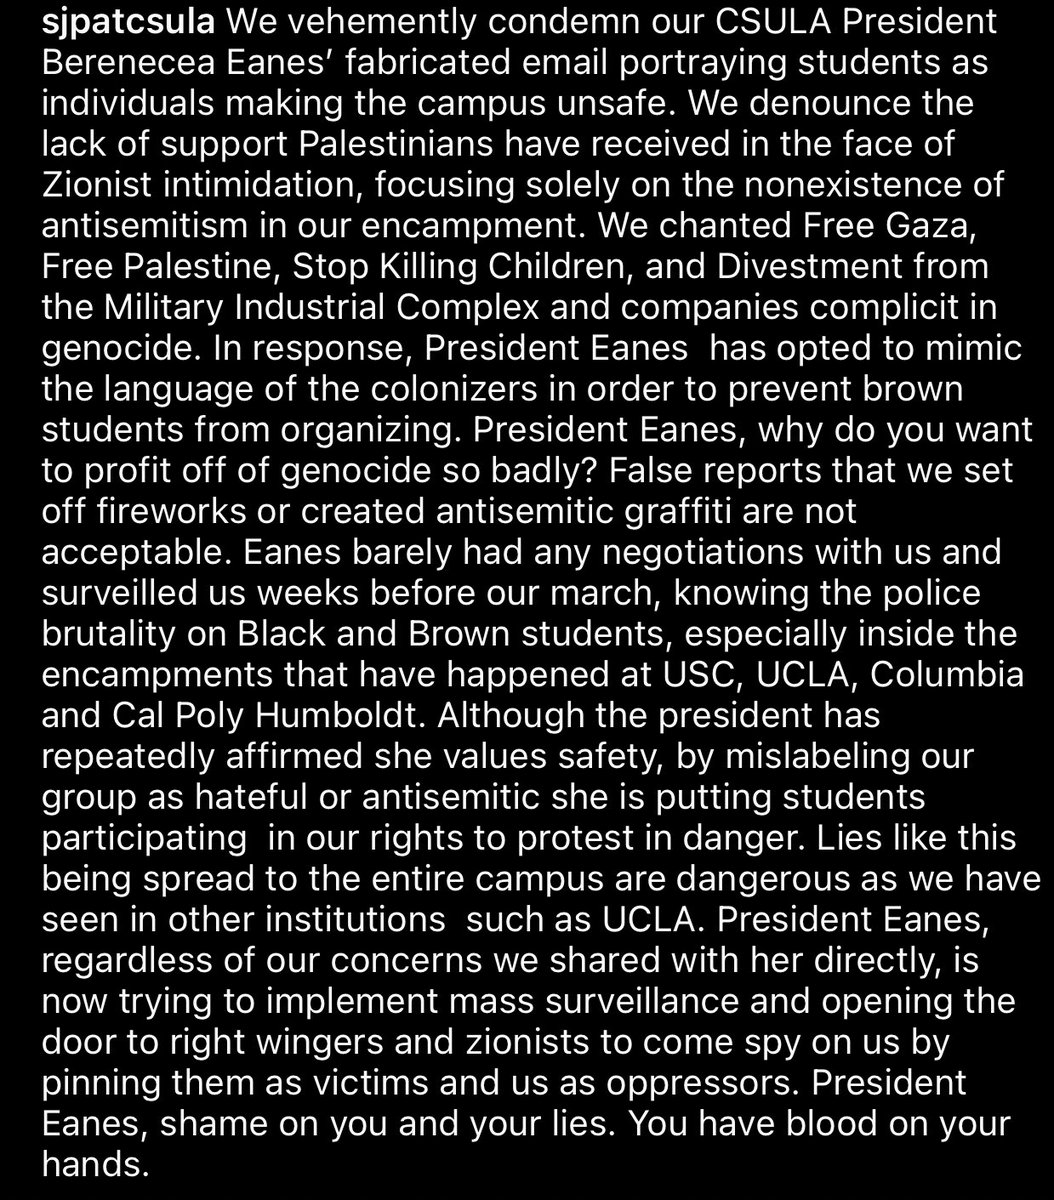 Here's CSULA Palestine Solidarity Encampment's response to the bullshit rumors spread by President Berenecea and later republished by LAT: We vehemently condemn our CSULA President Berenecea Eanes’ fabricated email portraying students as individuals making the campus unsafe.